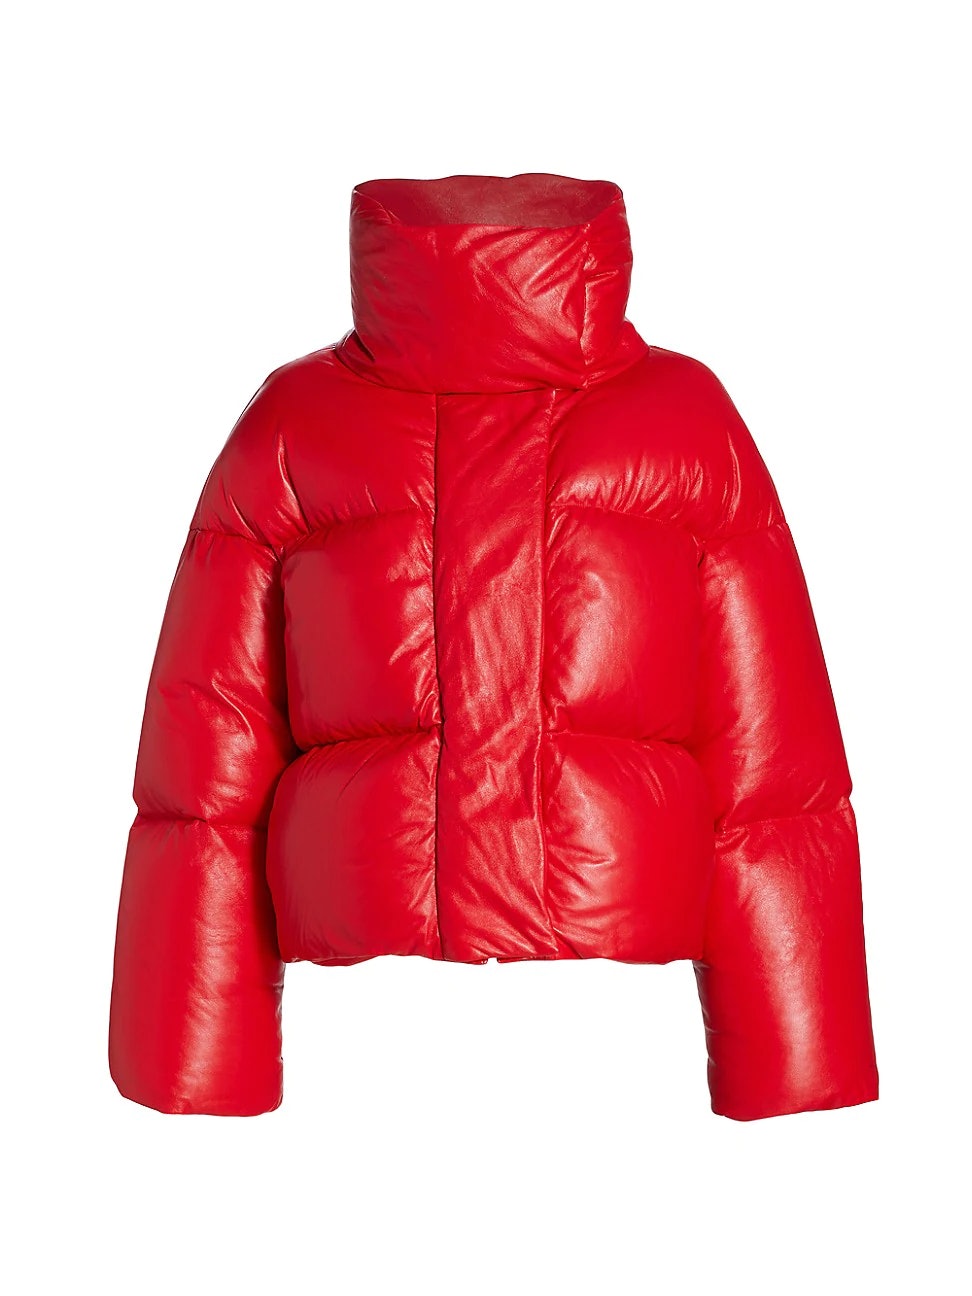 Mackage Bailey Convertible Leather Puffer Jacket in Red